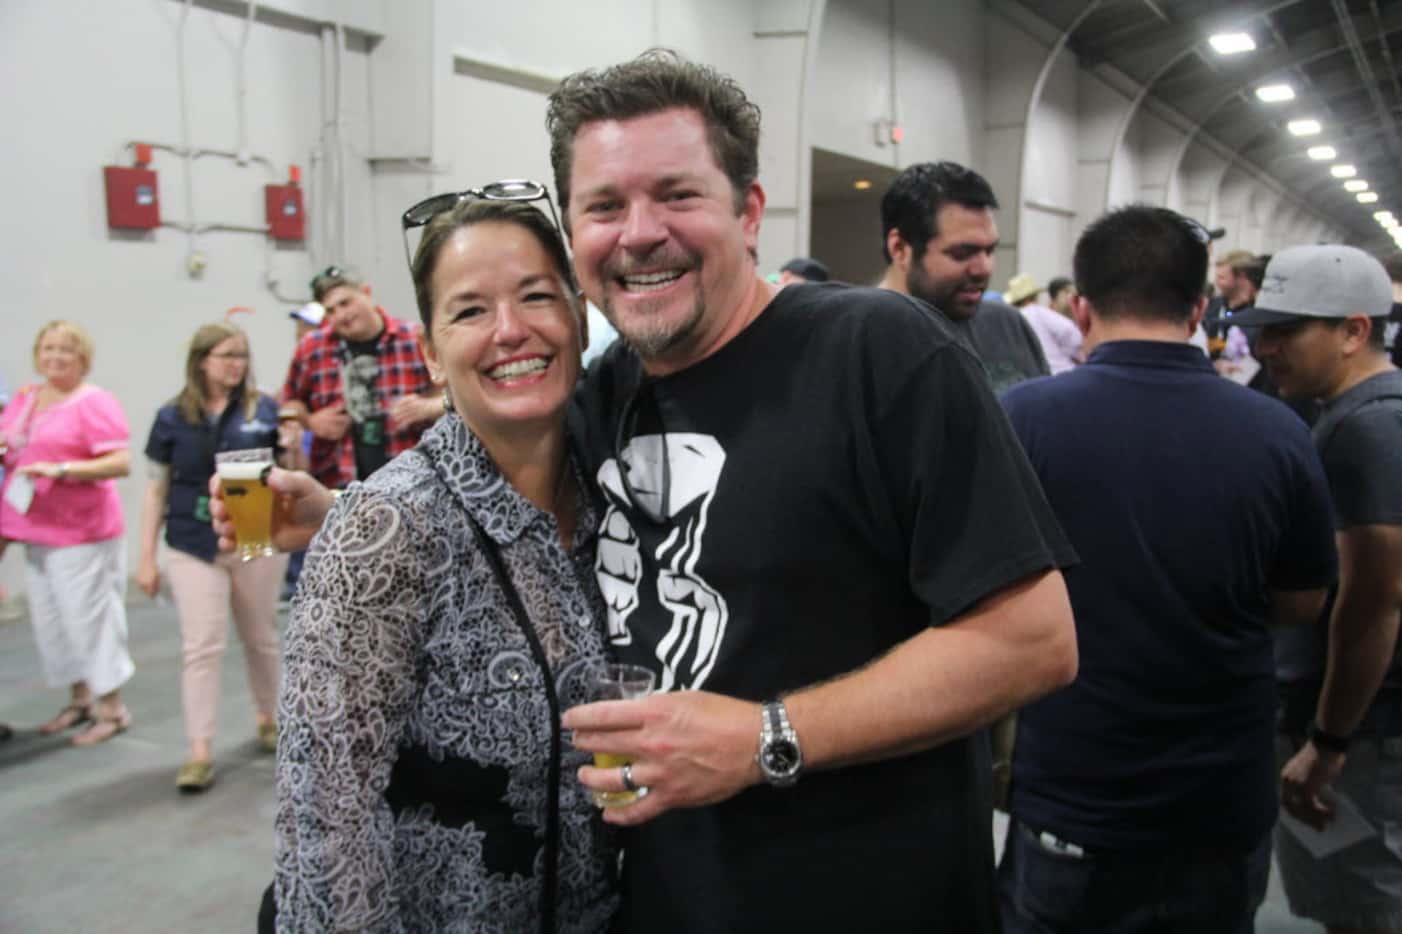 The Big Texas Beer Fest is Dallas’ original beer festival. The 2016 event is the...